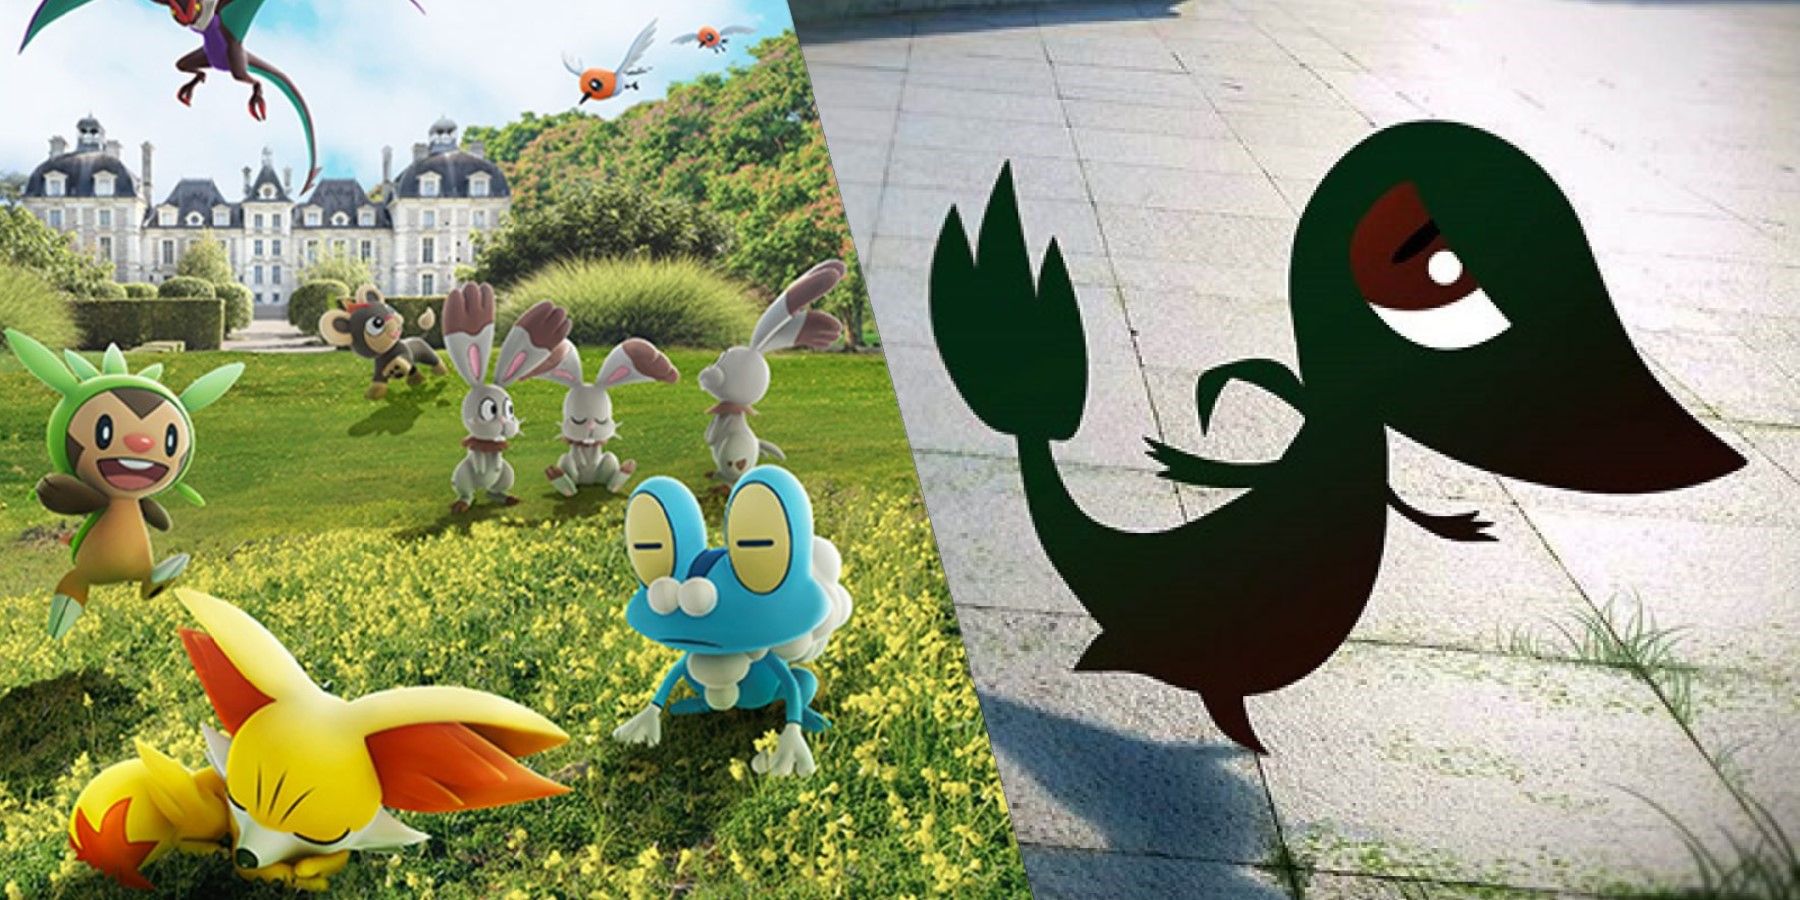 Pokemon Gen 5 and 6 Remakes May Be Why Certain Pokemon Are Missing